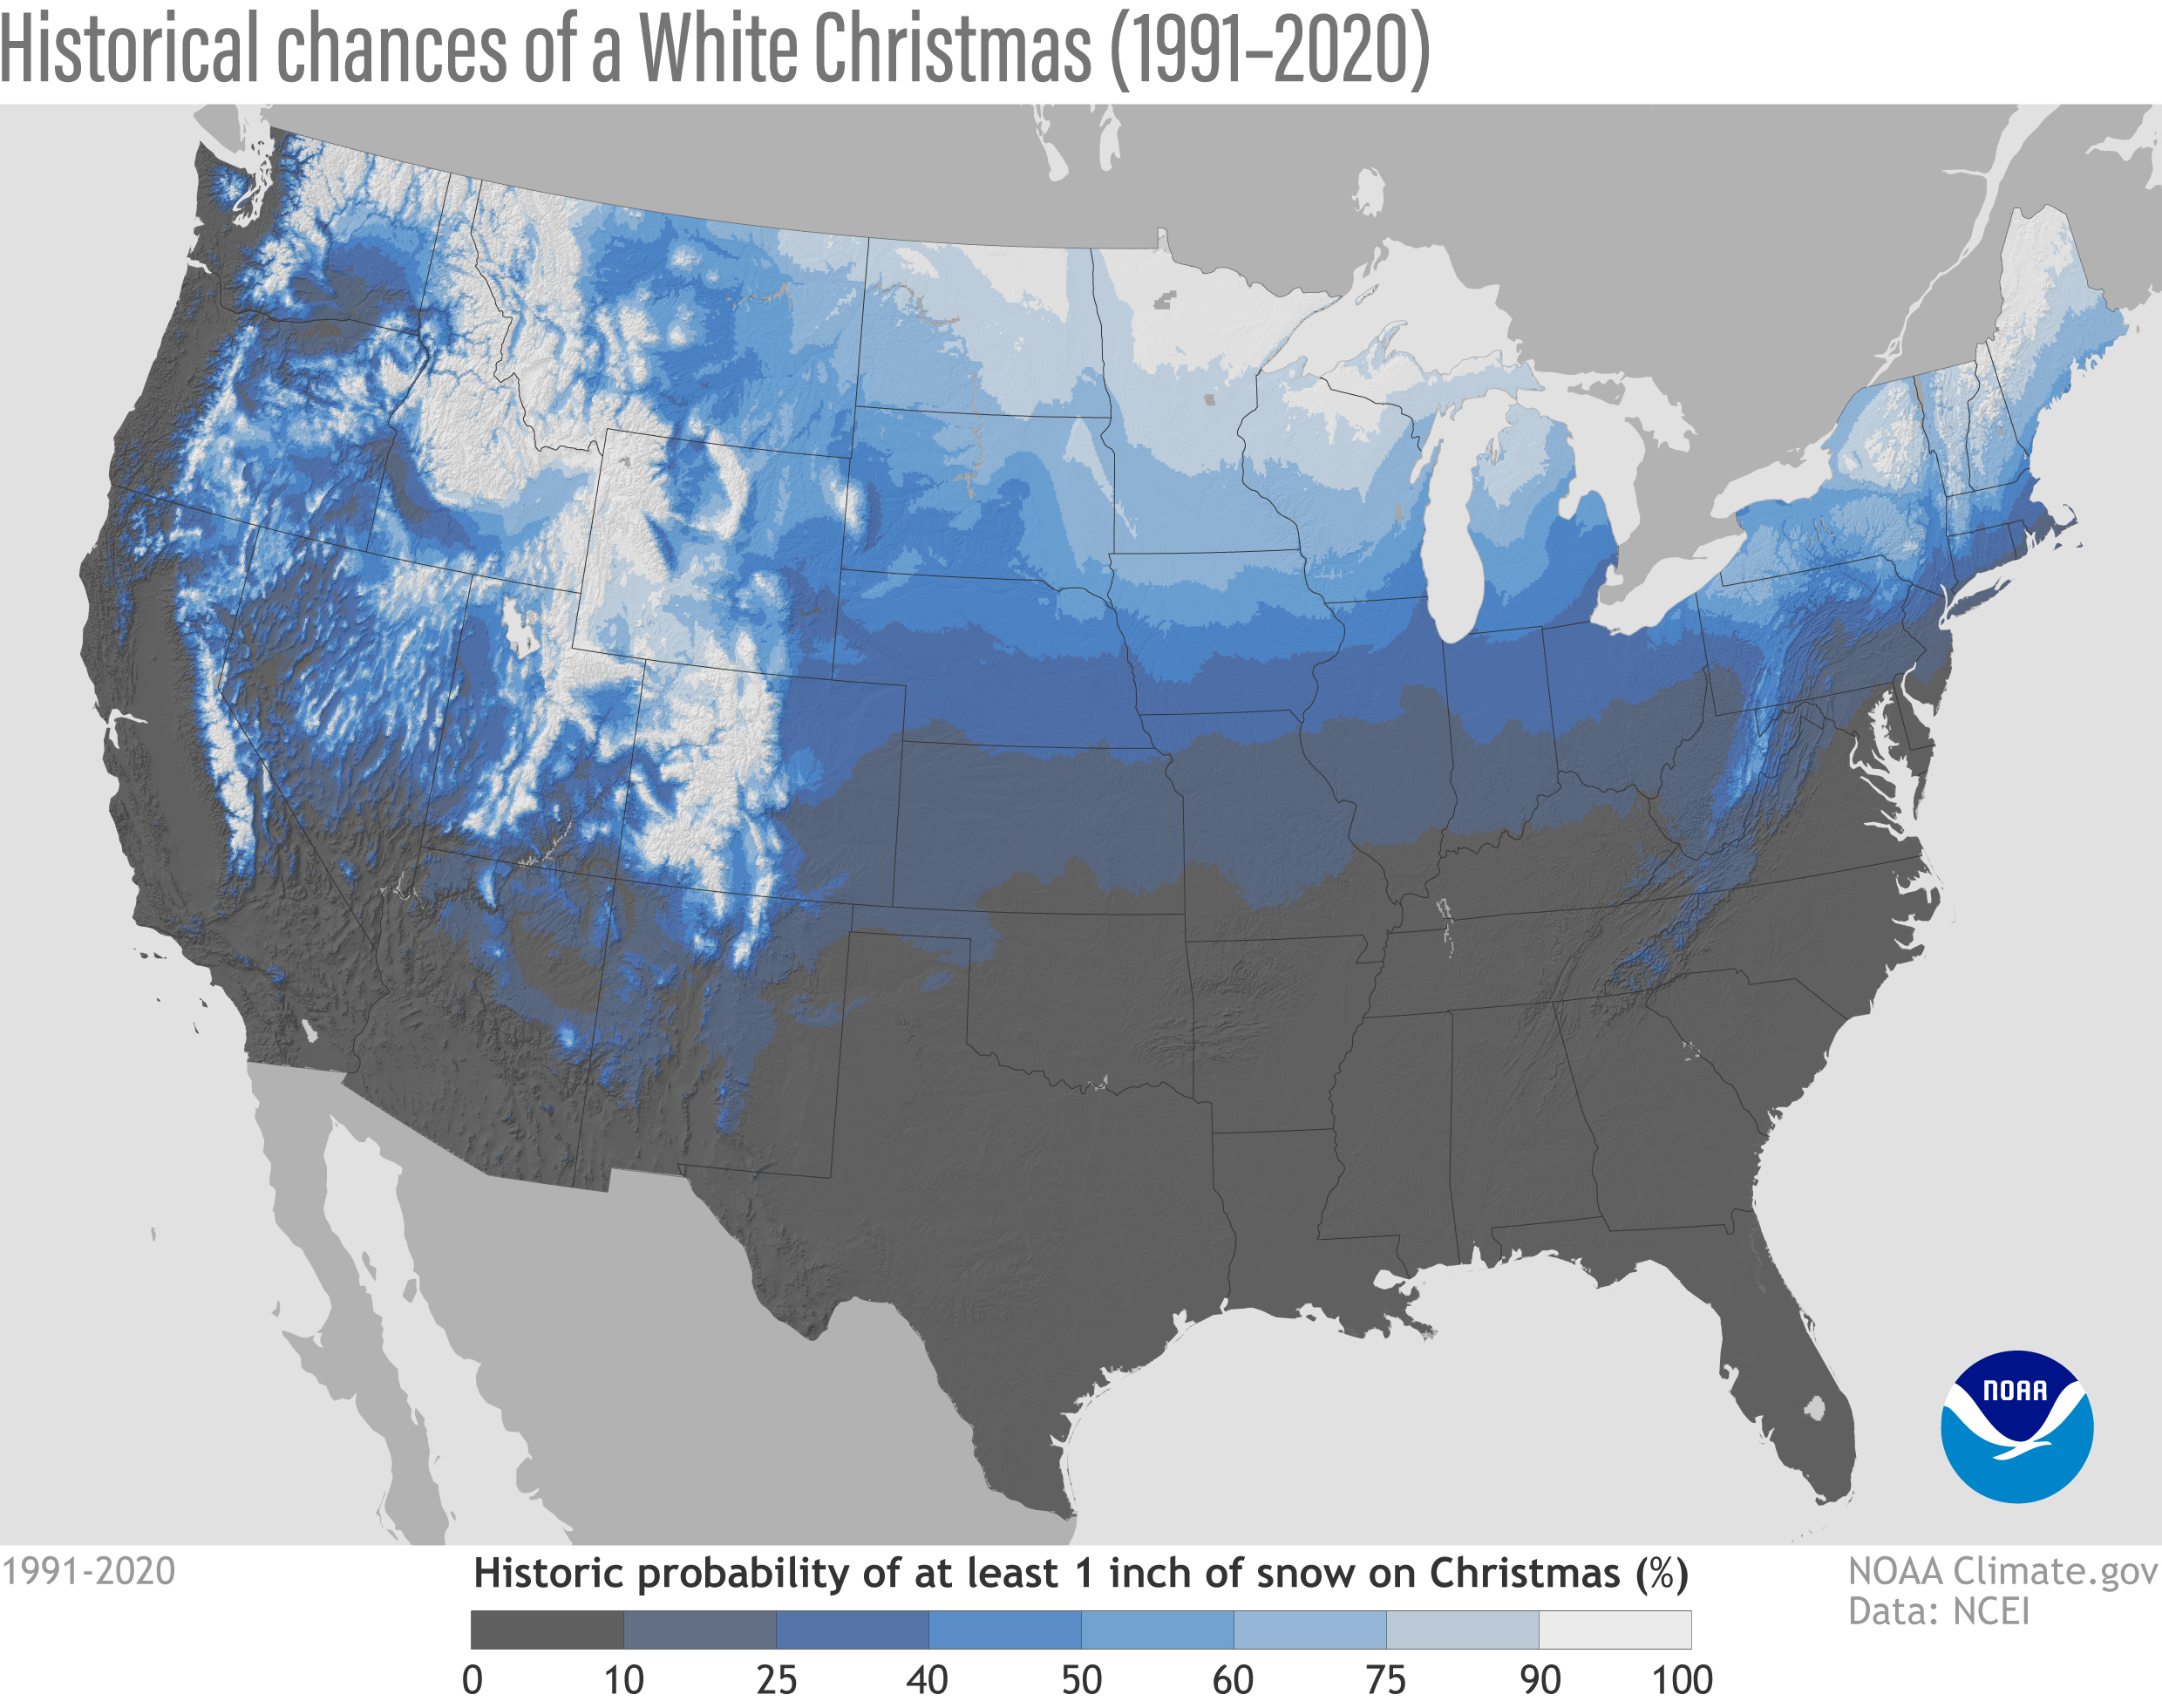 A map of the United States showing the historic probability of at least one inch of snow on Christmas Day (based on climate data 1991-2020).